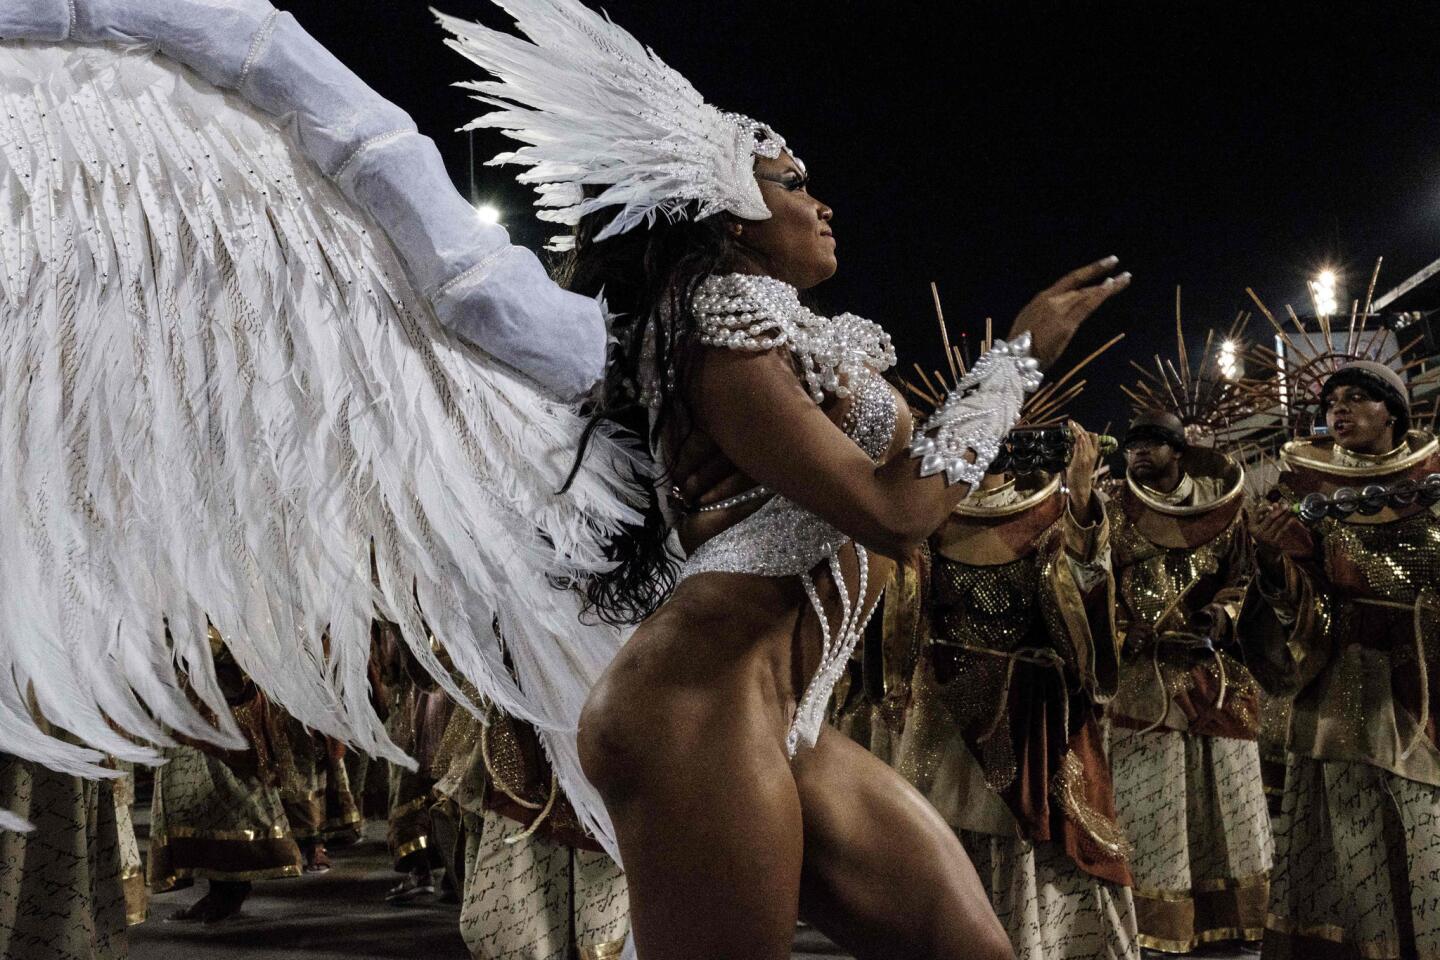 TOPSHOT - A dancer of the Mangueira samba school performs on the second night of Rio's Carnival at the Sambadrome in Rio de Janeiro, Brazil, early on February 28, 2017. / AFP PHOTO / Yasuyoshi CHIBAYASUYOSHI CHIBA/AFP/Getty Images ** OUTS - ELSENT, FPG, CM - OUTS * NM, PH, VA if sourced by CT, LA or MoD **